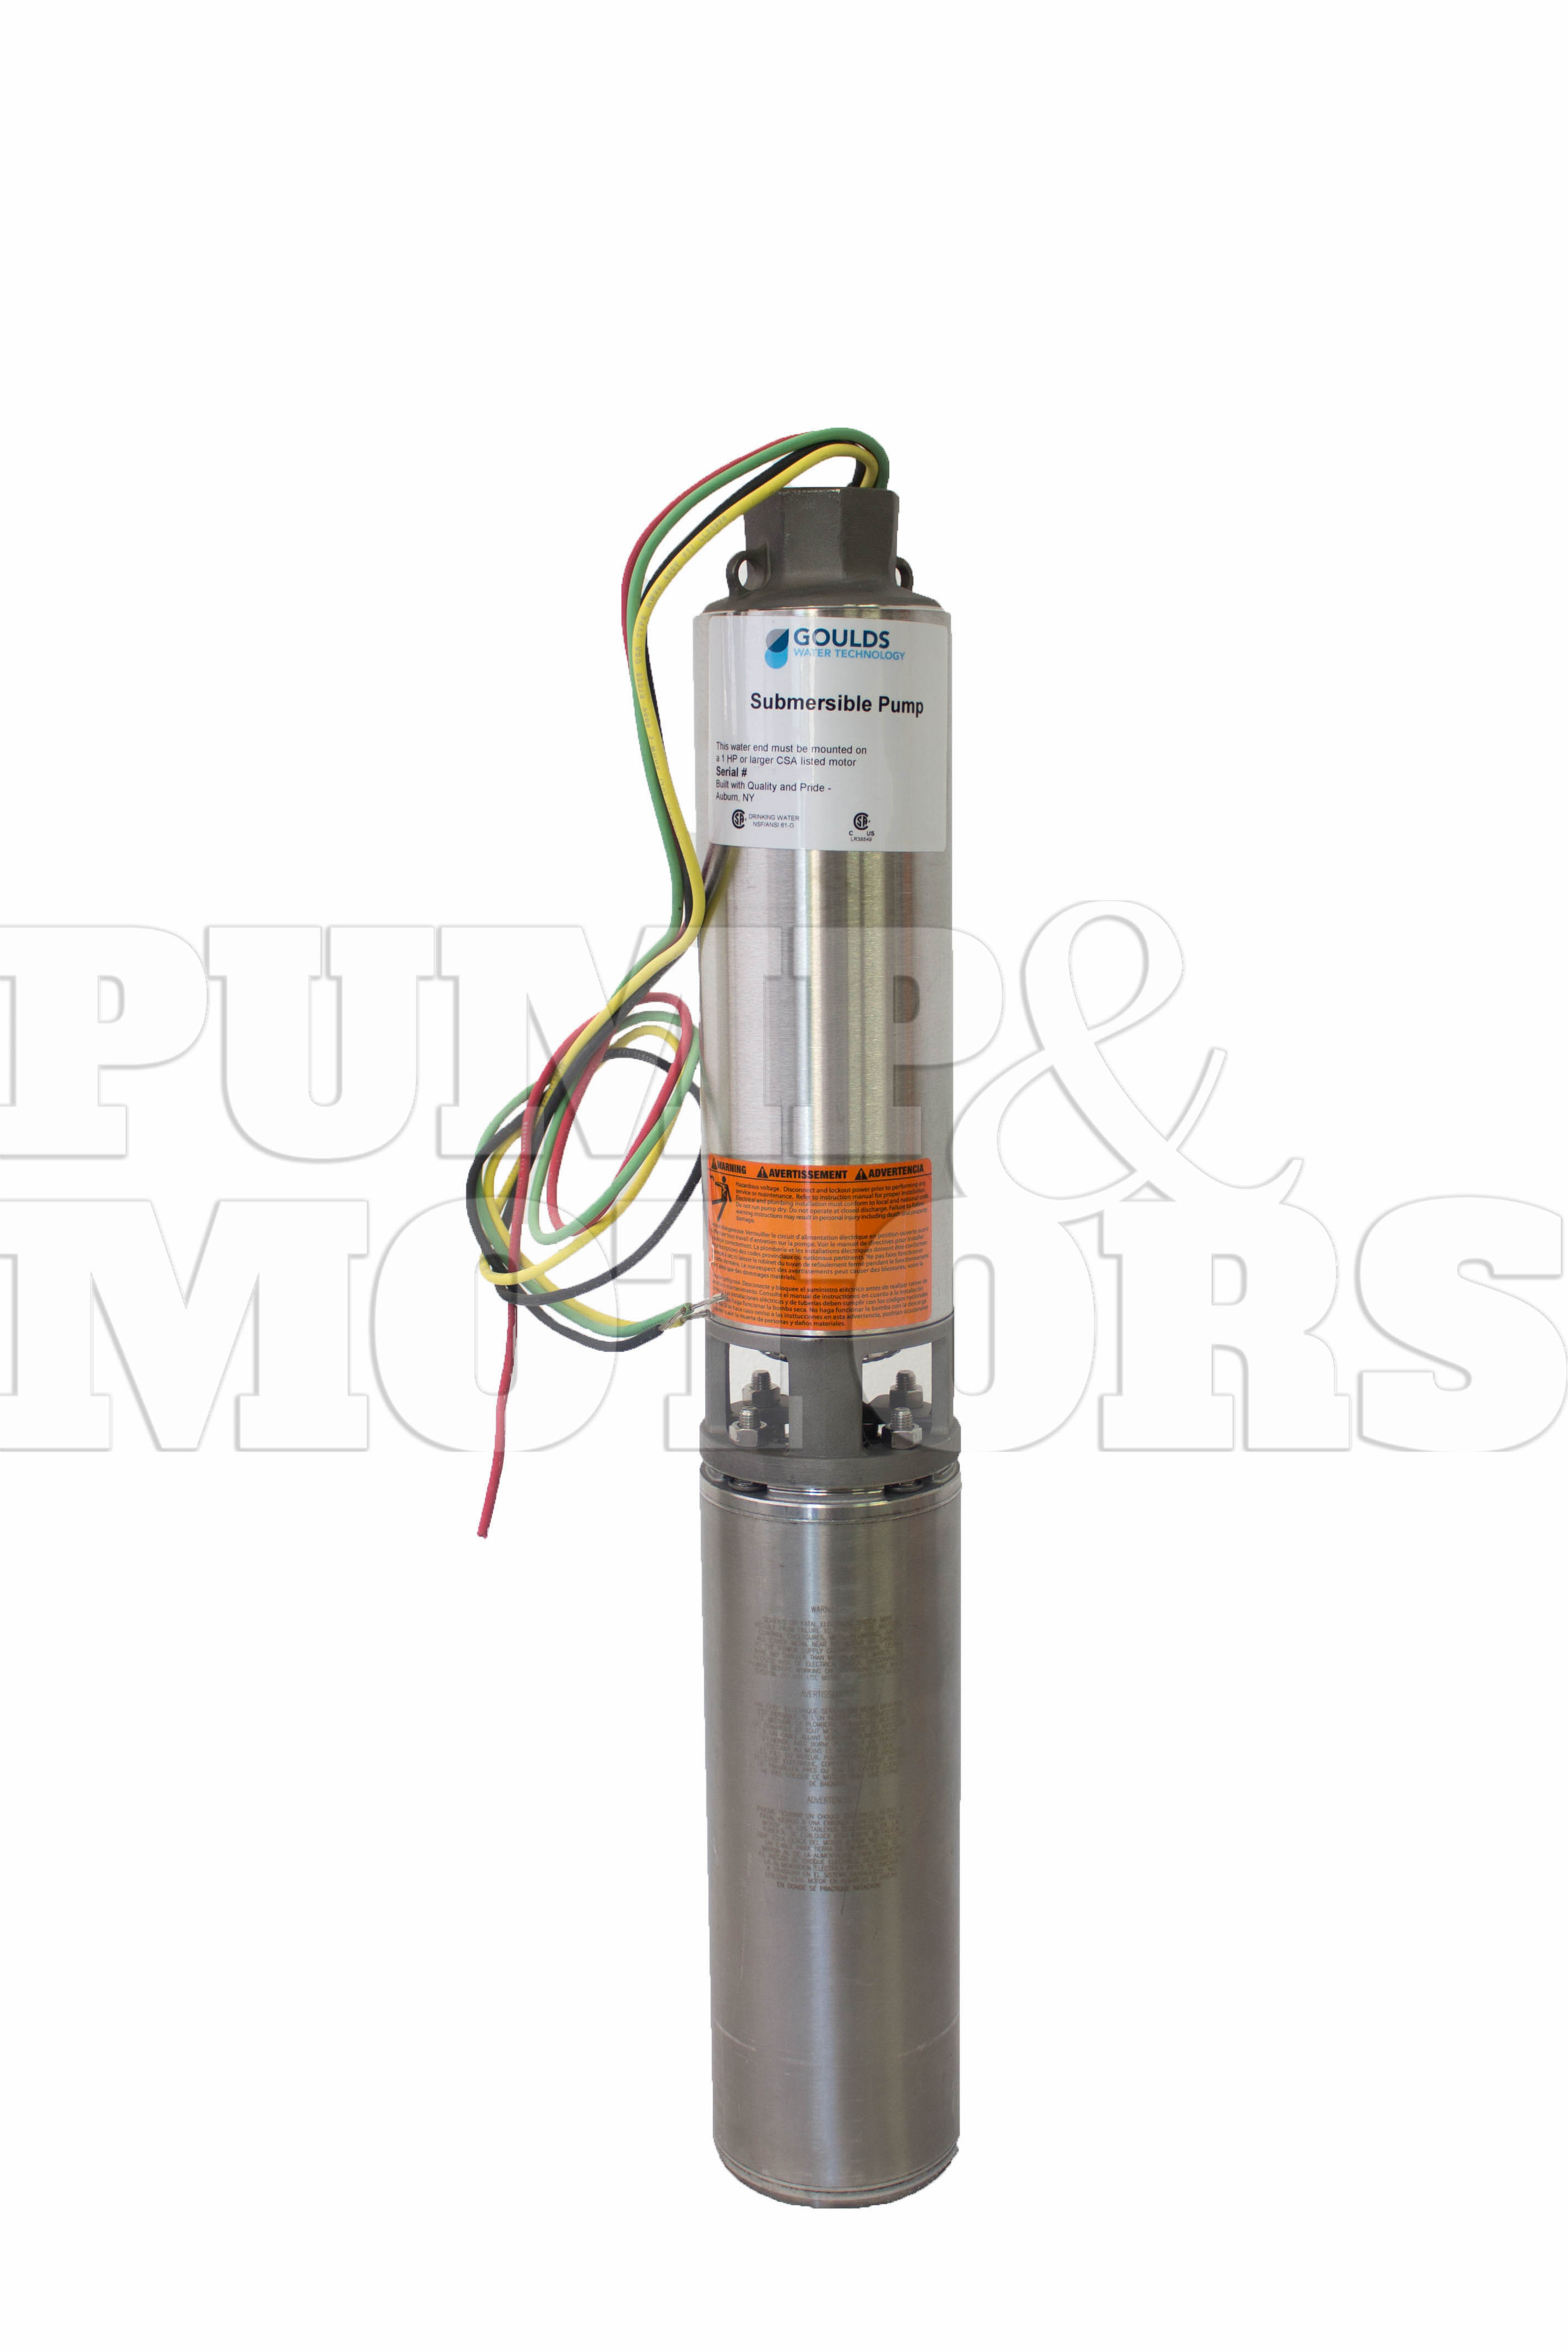 Goulds 75GS30412CL 3 HP 230V Submersible Water Well Pump 75GPM